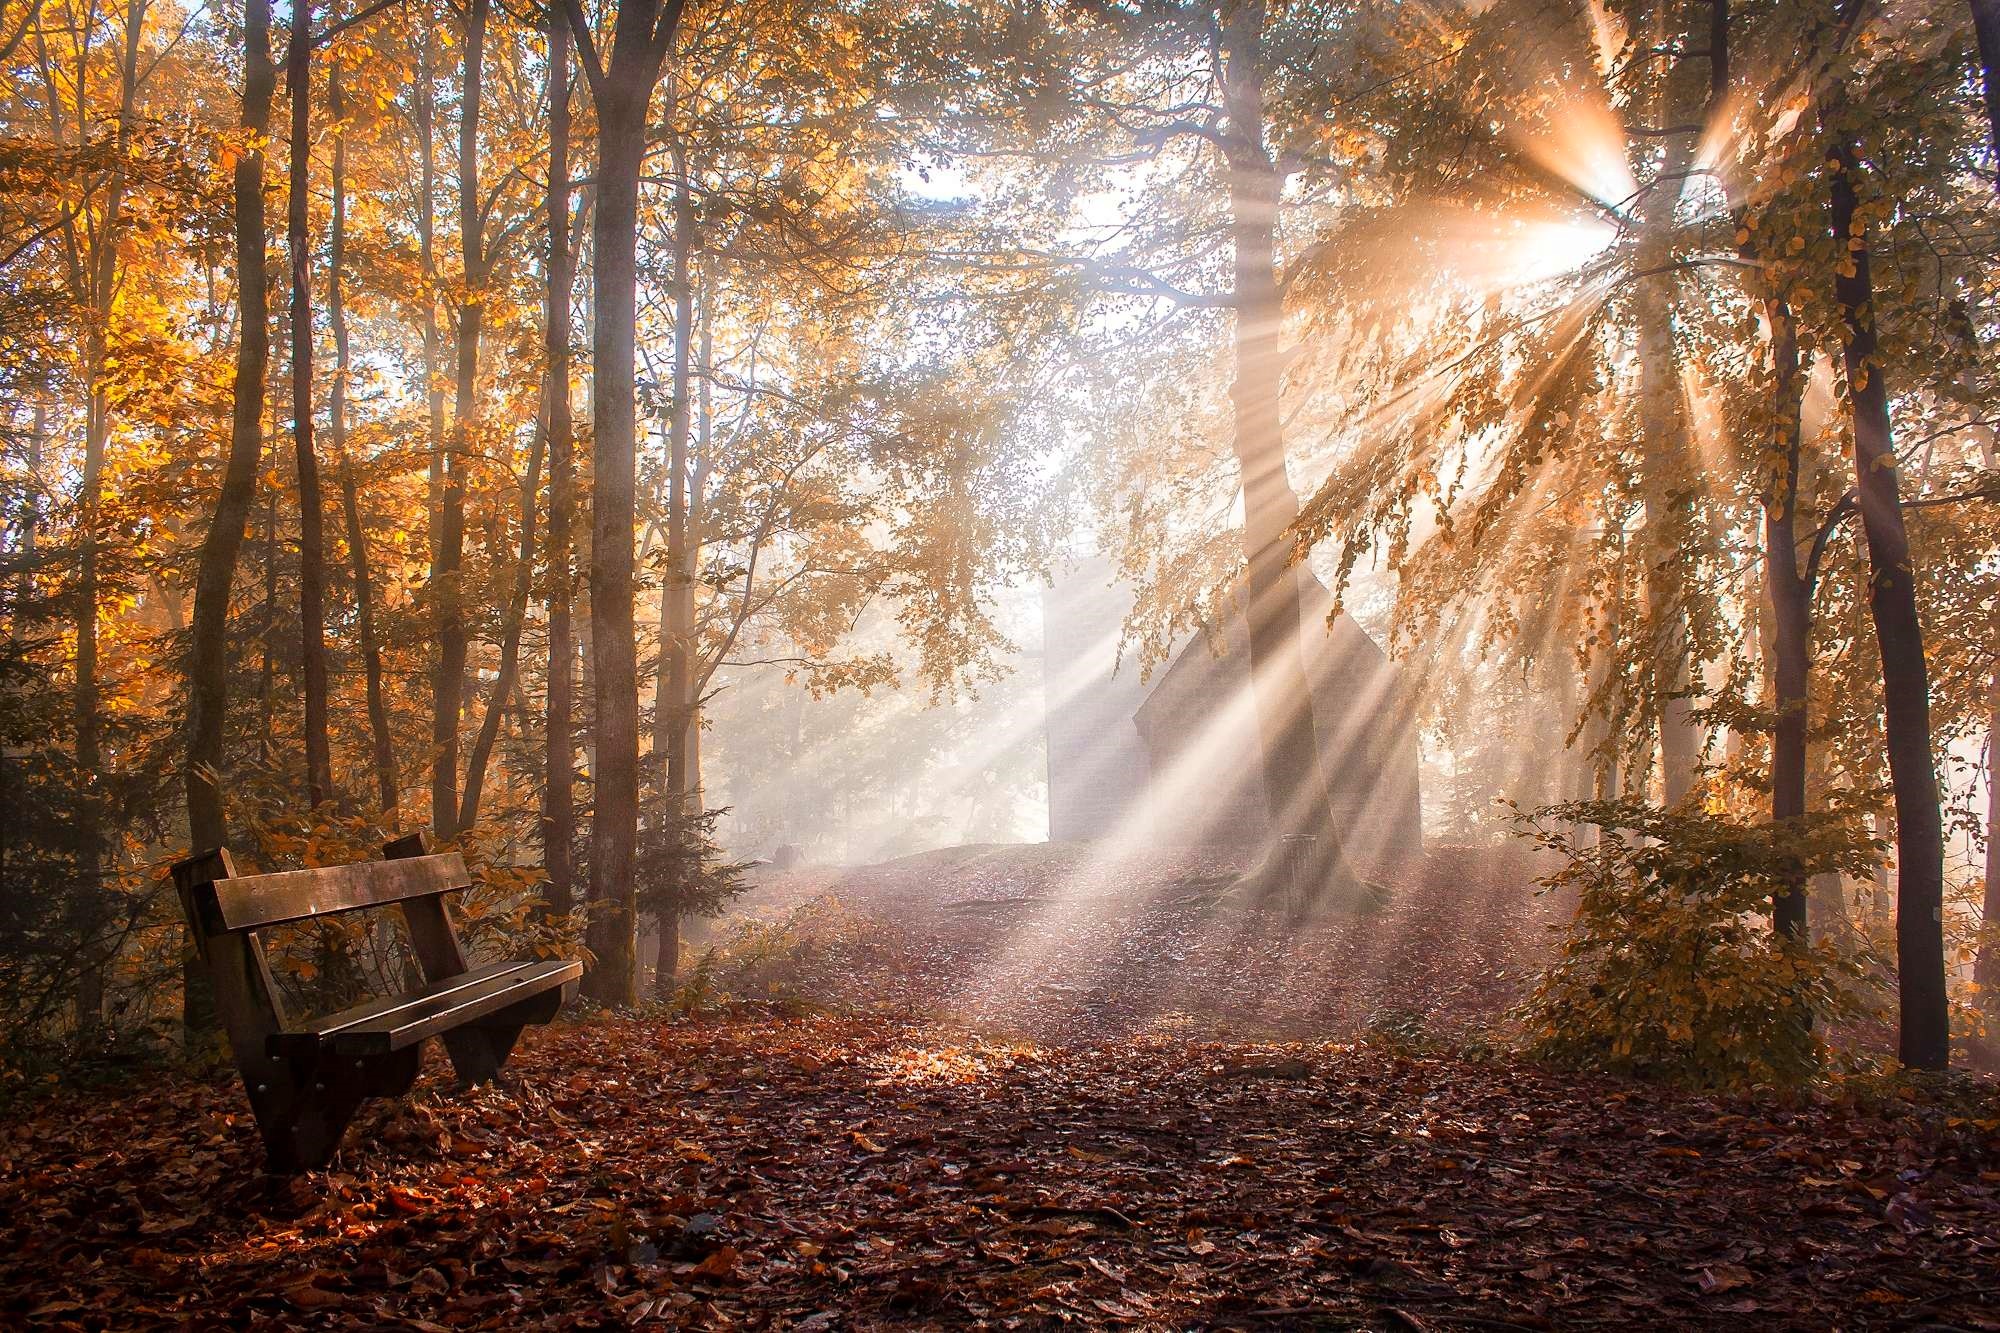 General 2000x1333 nature park bench leaves sun rays fall trees mist sunlight forest